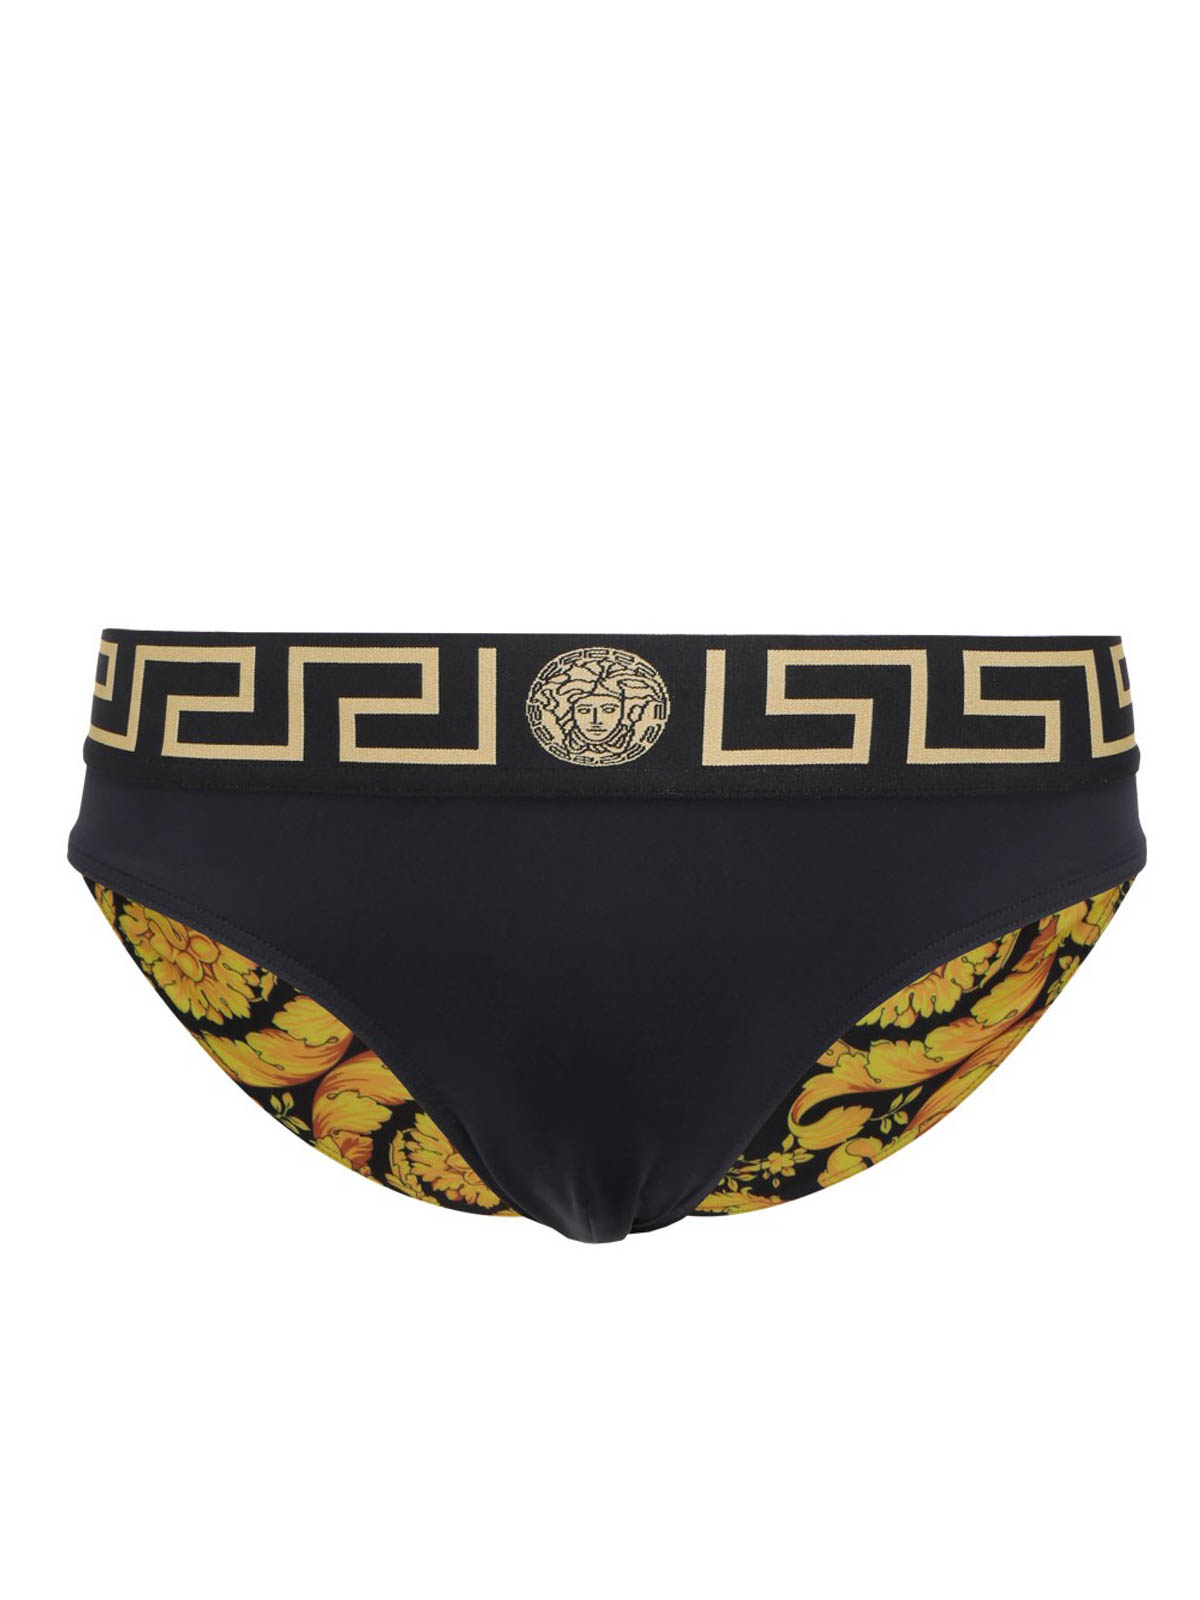 eindpunt Ster Fjord Swim shorts & swimming trunks Versace - Swimming trunk with Greca -  ABU01025A232185A80G